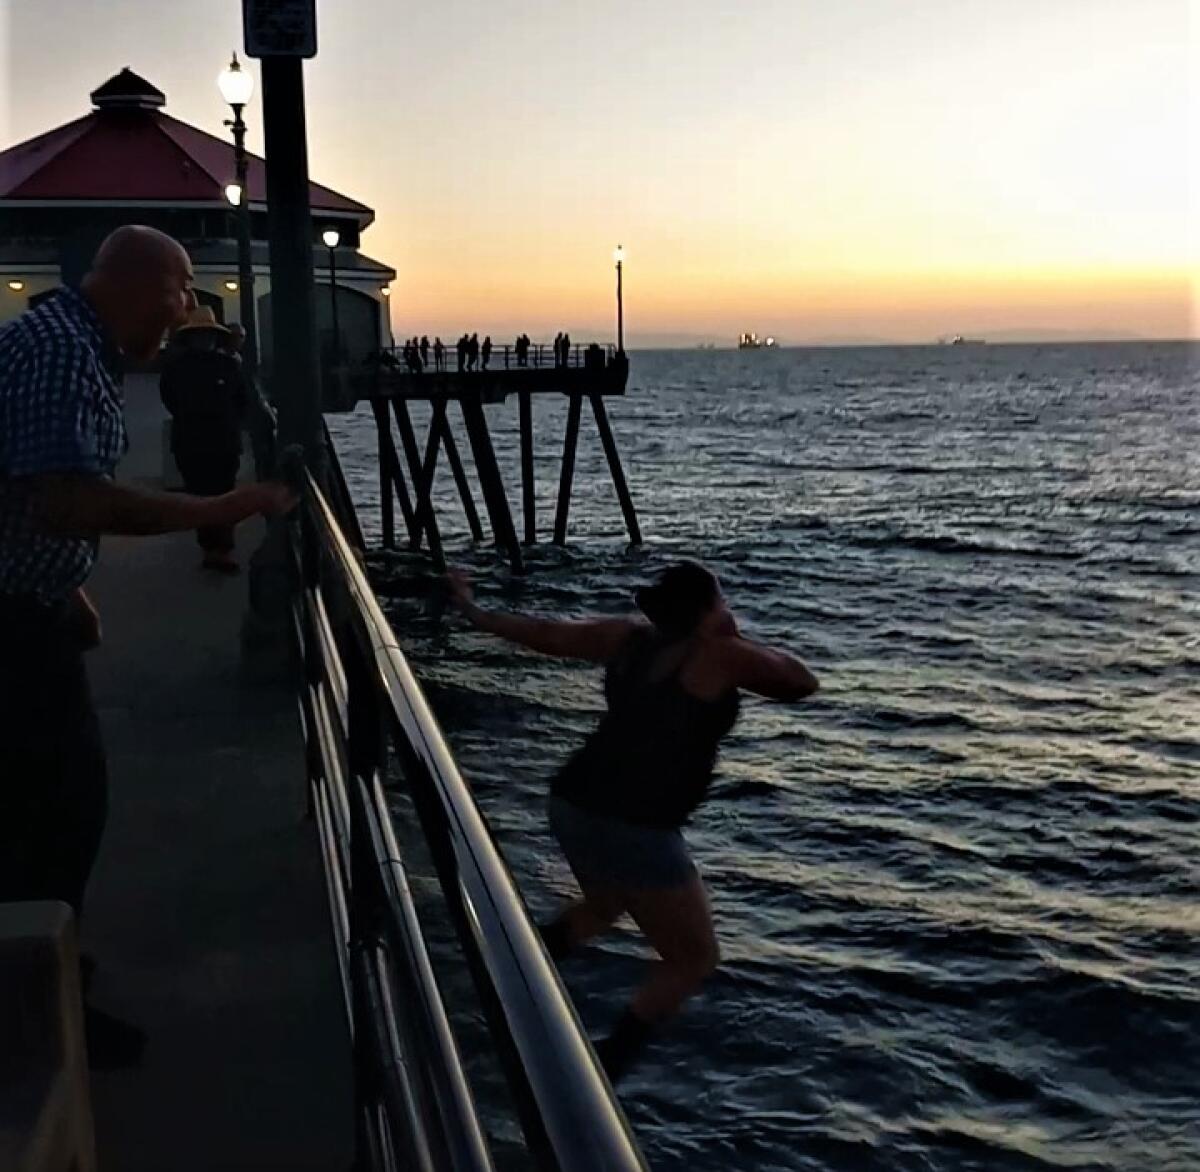 A woman jumps off a pier into the ocean as a man standing behind her shouts